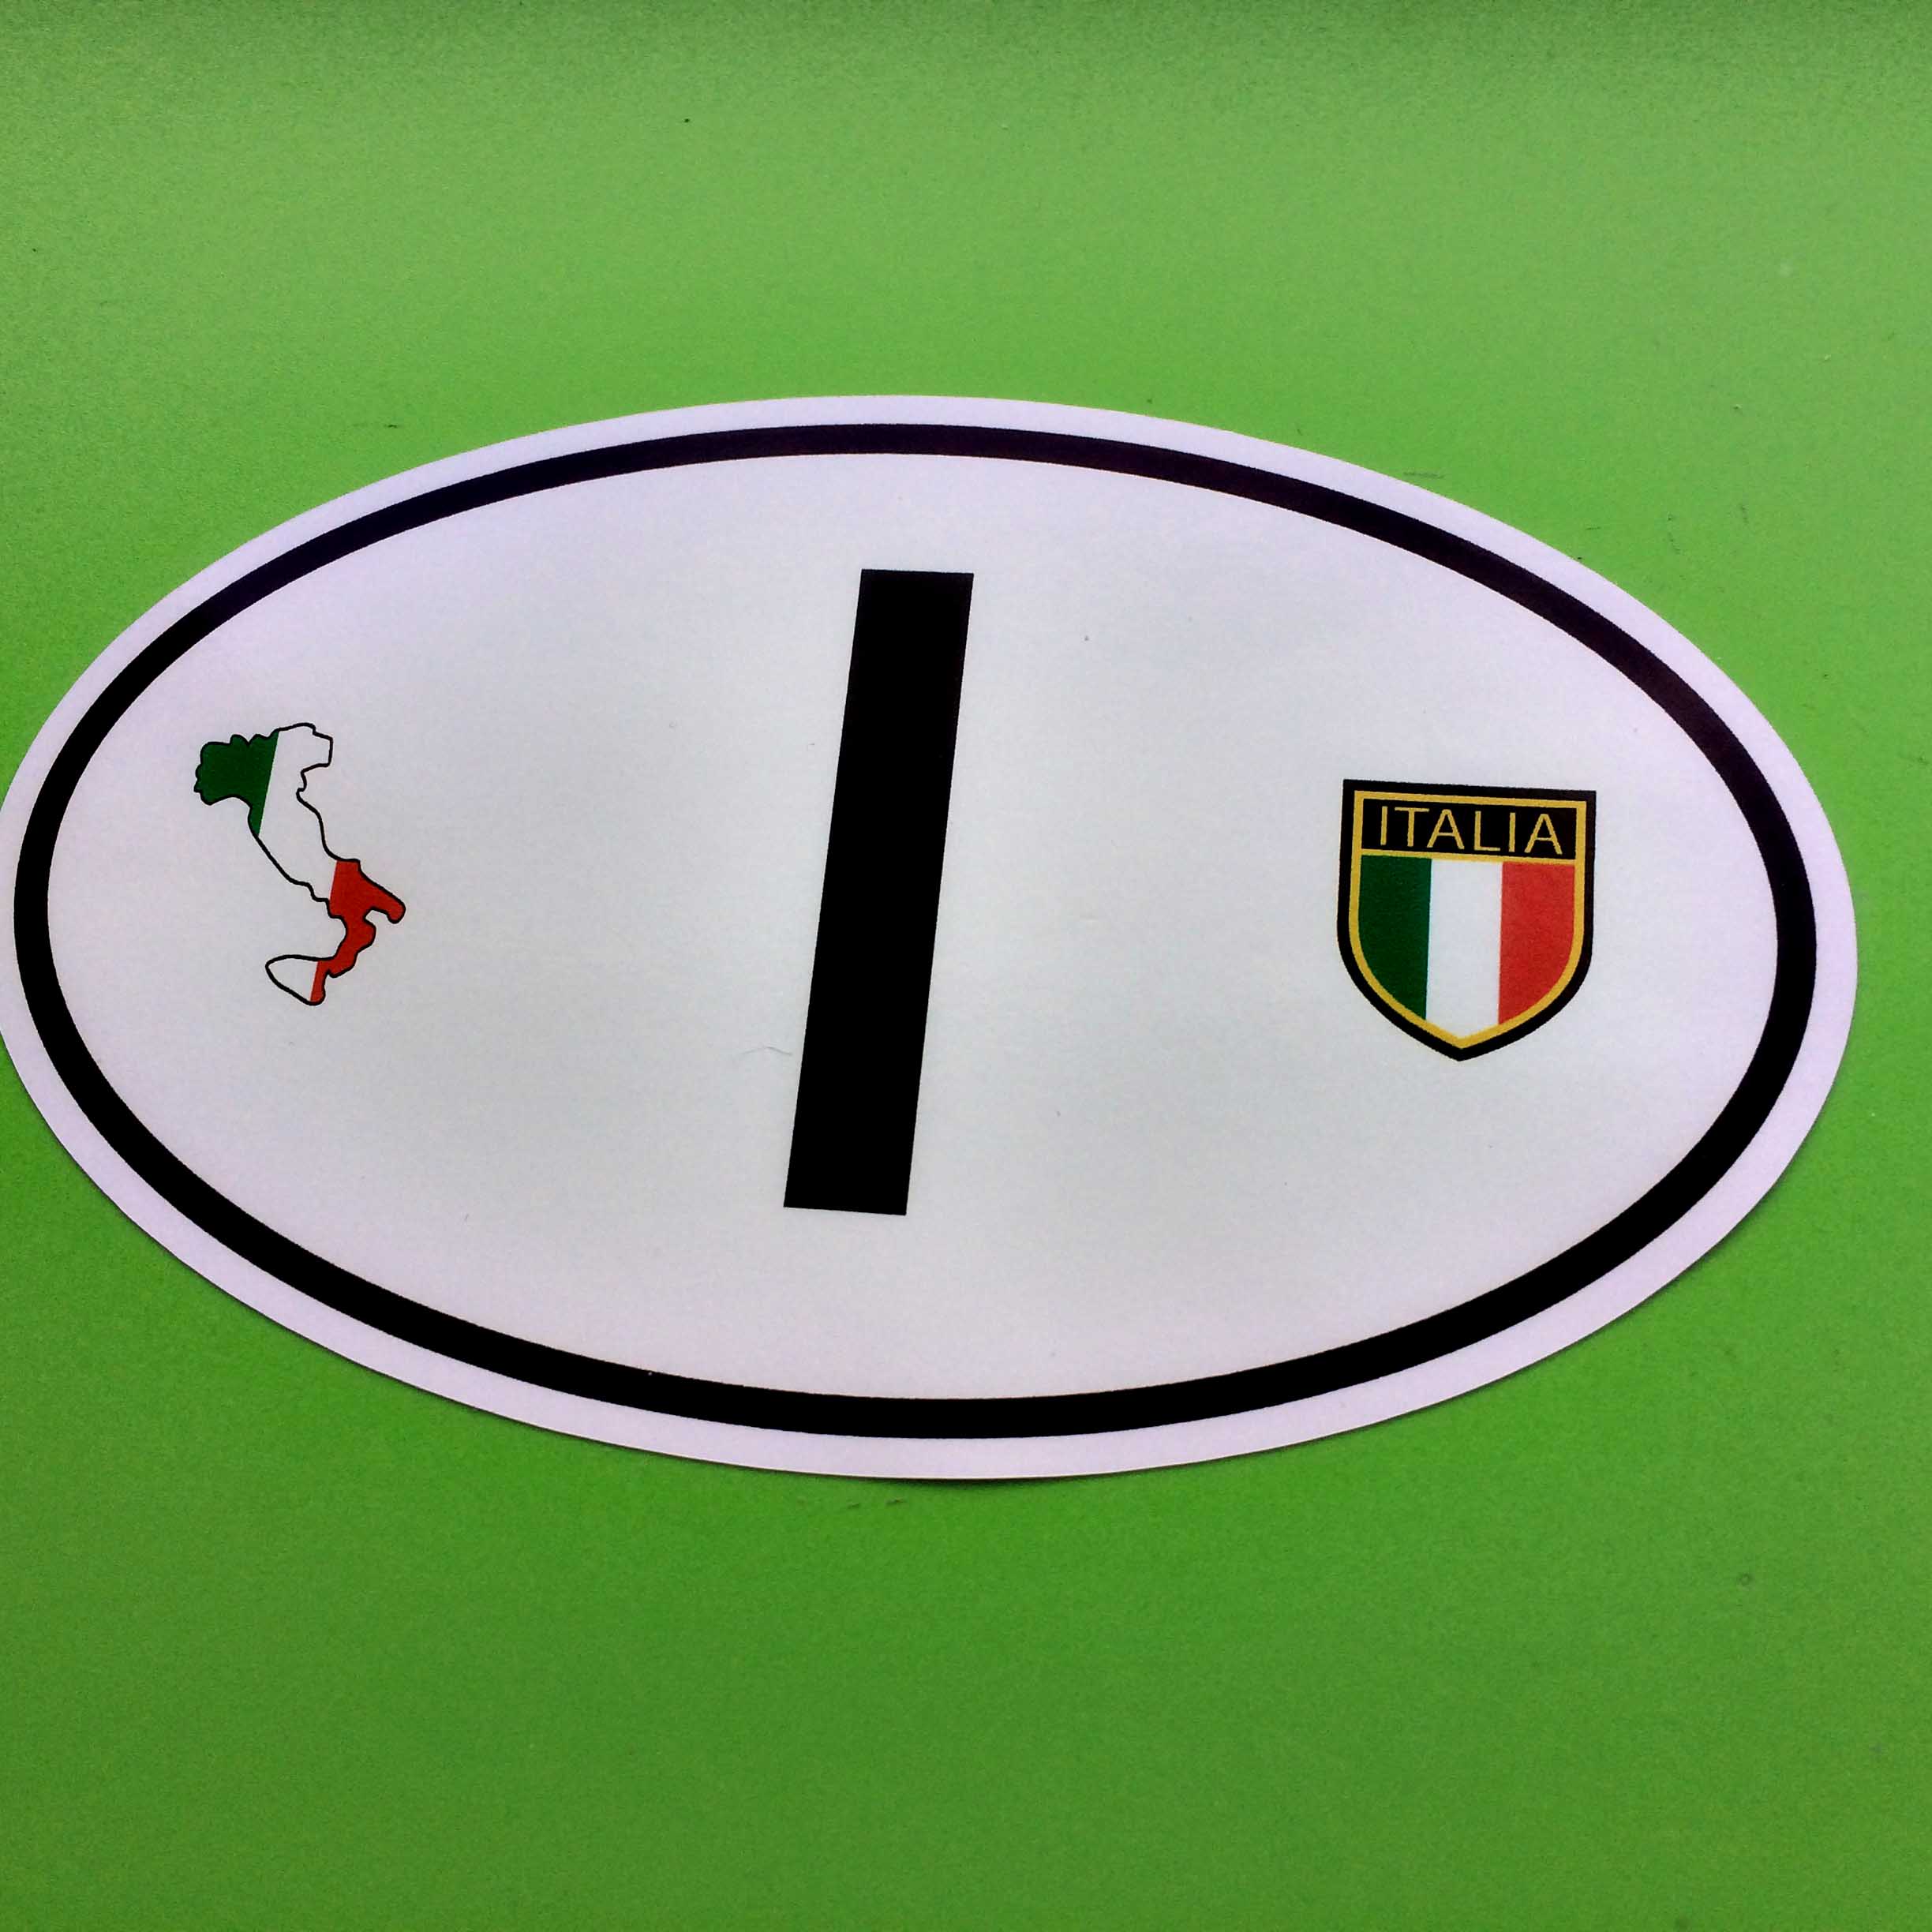 I FOR ITALY STICKER. A white oval sticker with a black border. The letter I in black sits between a map of Italy in national colours and a shield - a vertical tricolour of green, white and red with Italia in gold lettering on a black background.